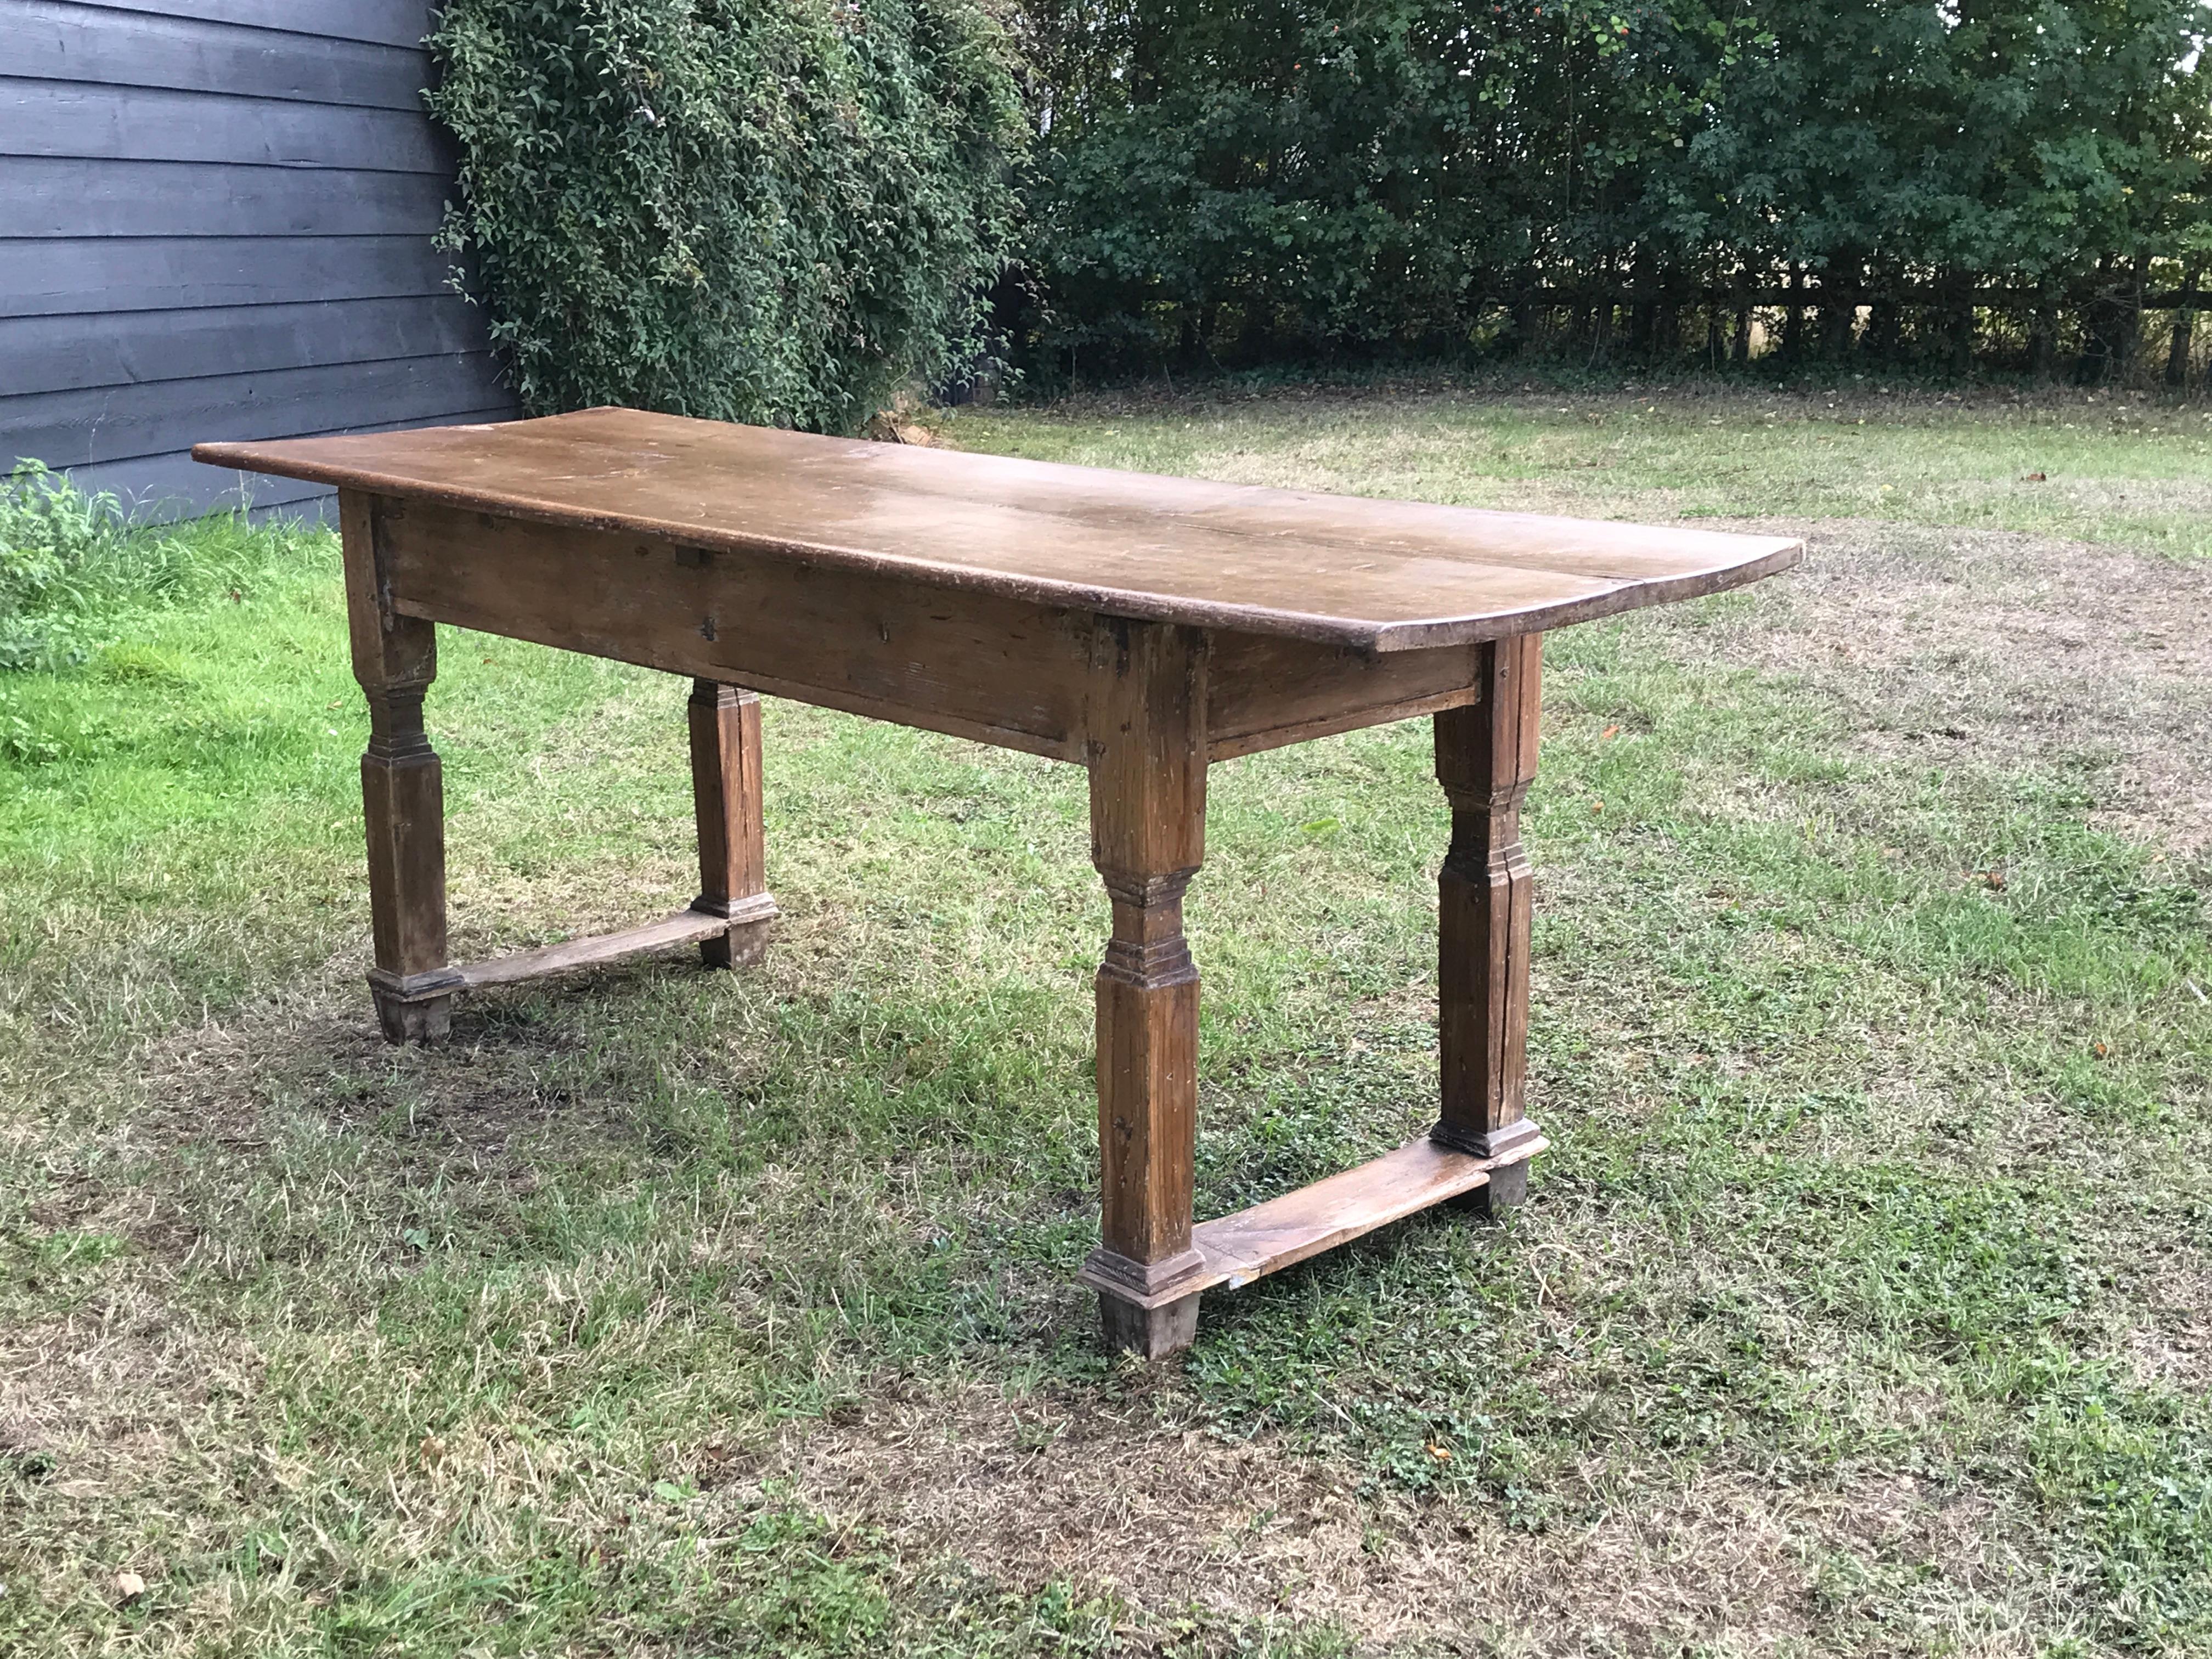 Pine farmhouse table with a single plank top
Rare to find a piece of vernacular or folk furniture with sophisticated features like the leg turnings on this table 

Length 206cm 81